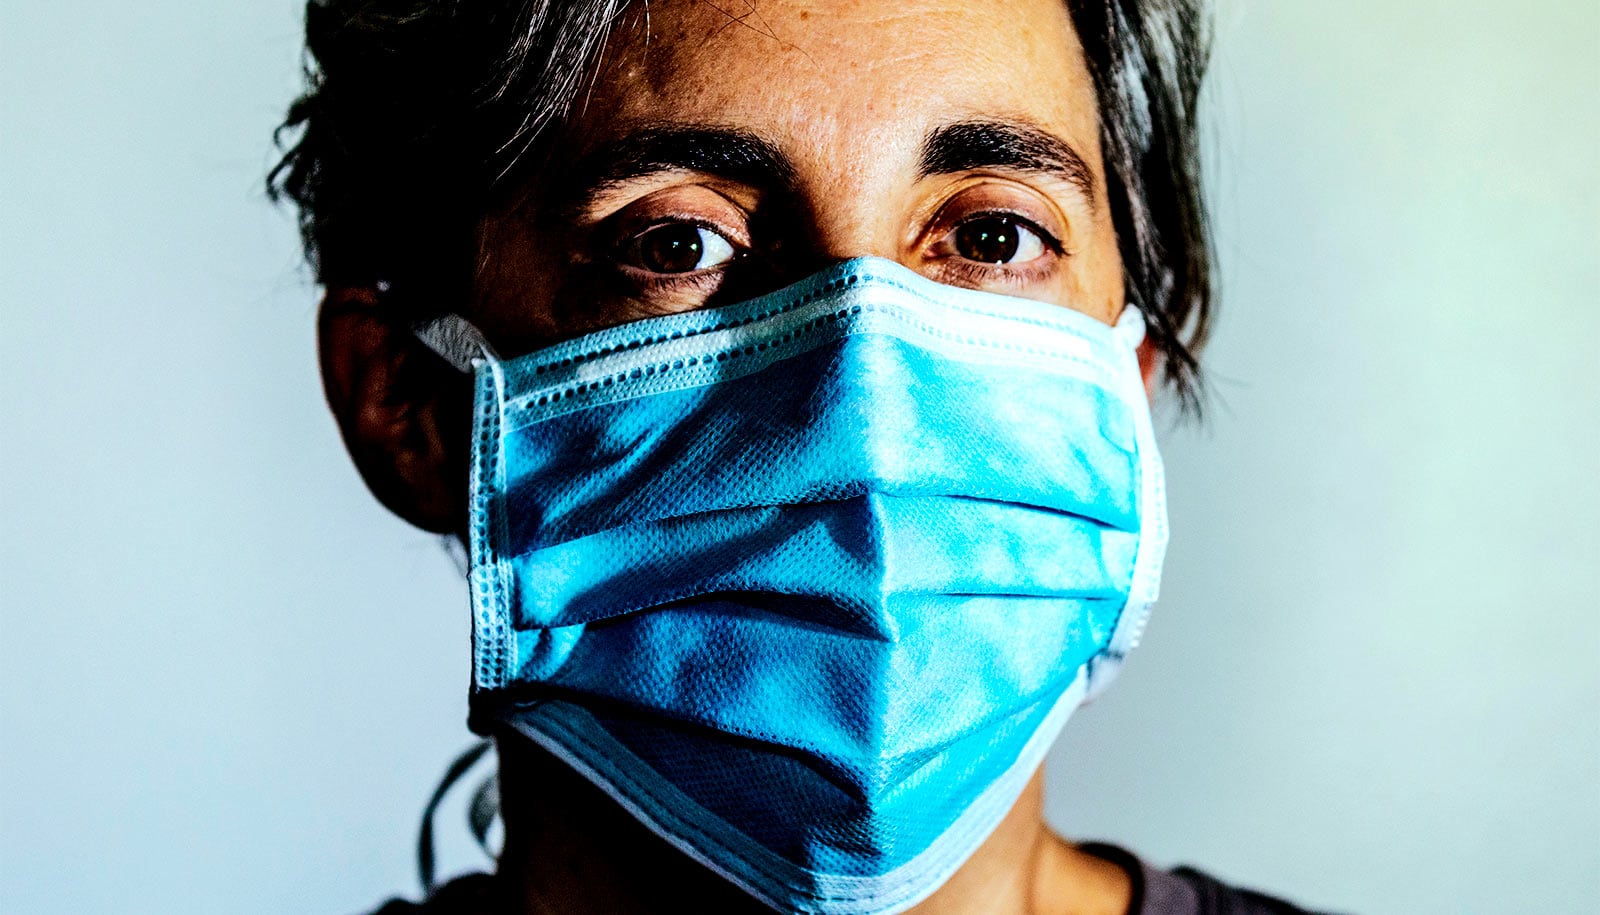 Expert: Periodic mask-wearing is here to stay - Futurity